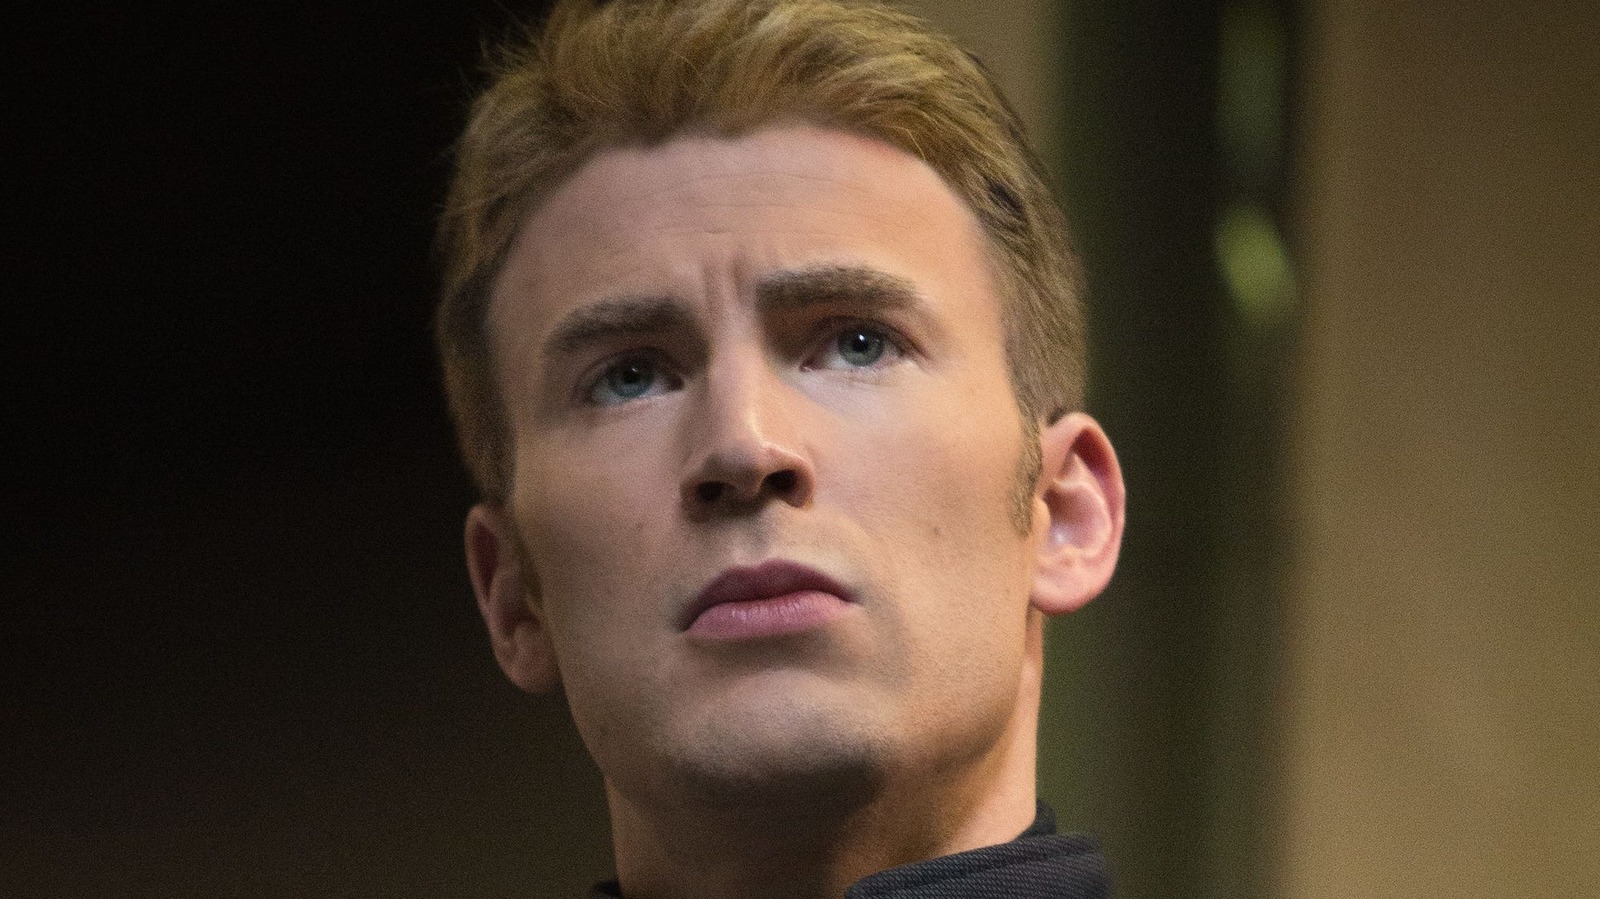 Recently saw Captain America 2 and I liked Chris Evans hair in the movie  Might seem simple but how do you style your hair like this   rmalefashionadvice